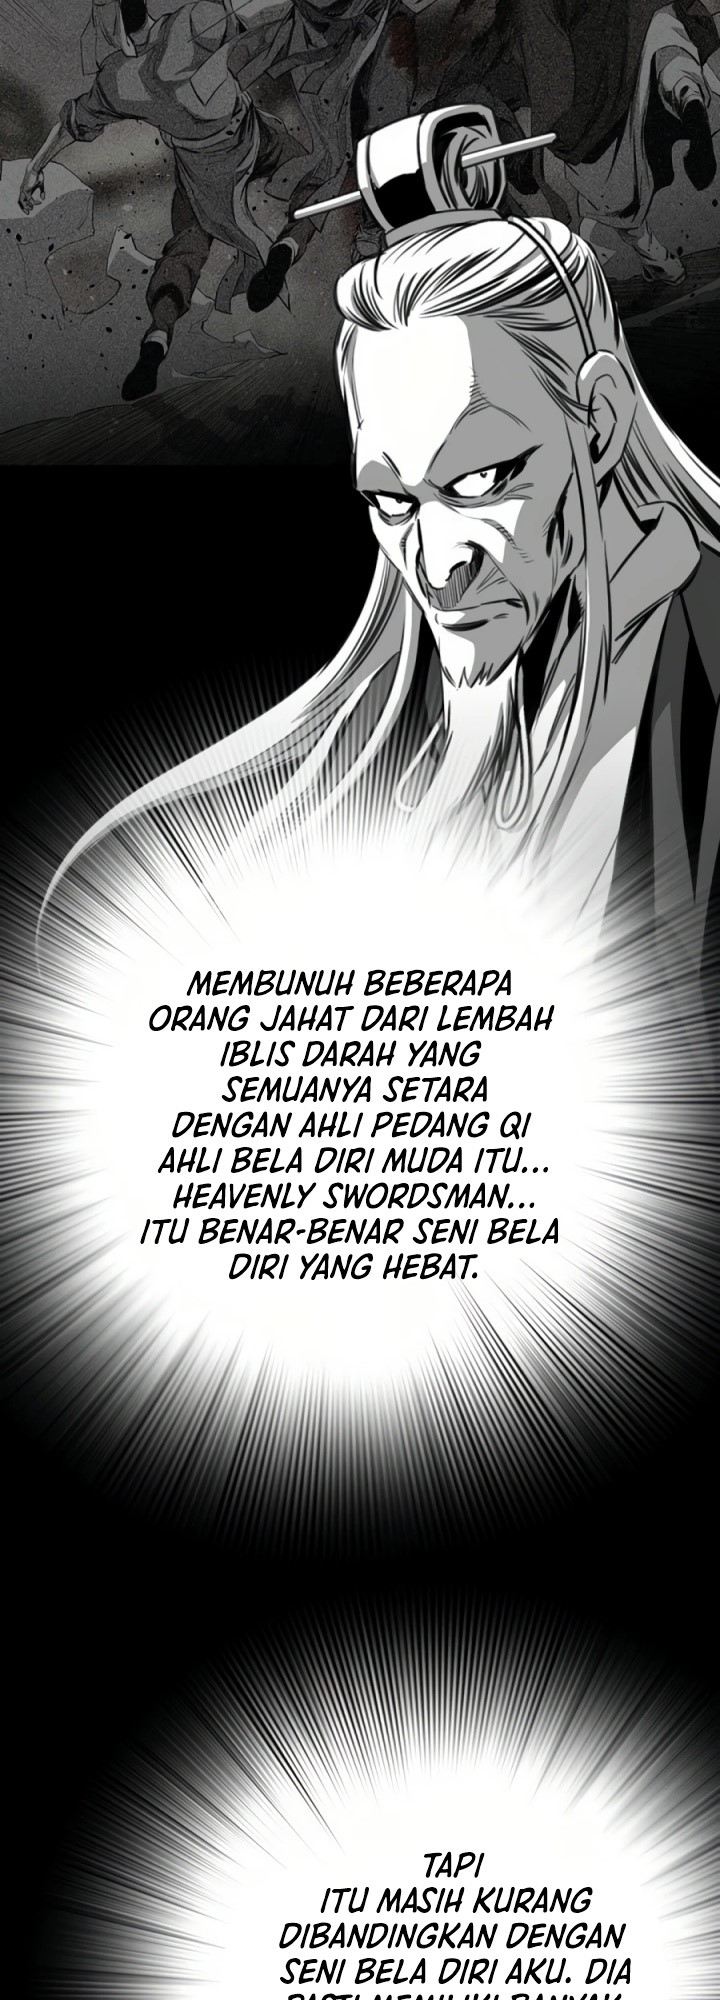 Way To Heaven Chapter 67